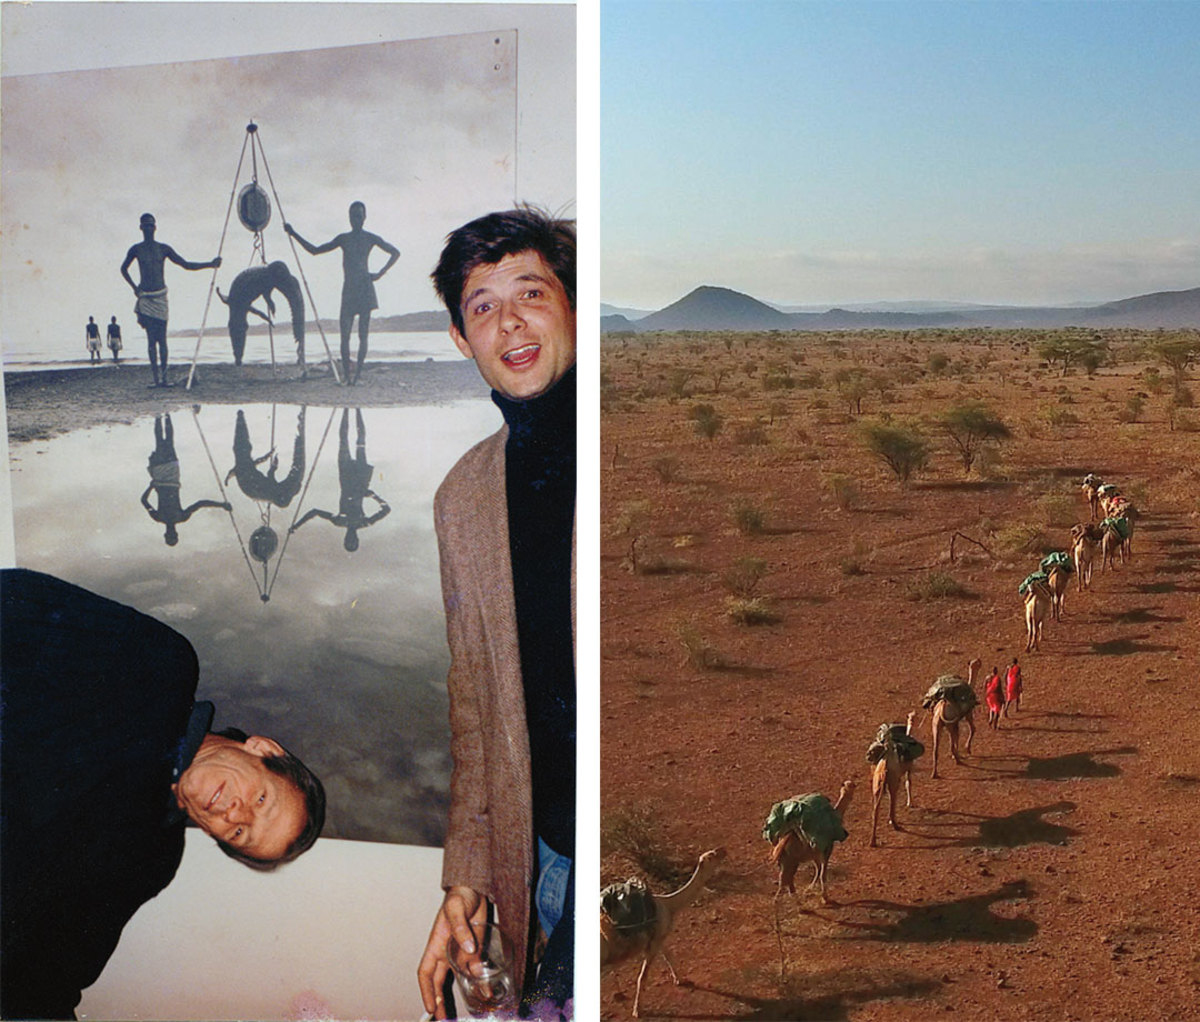 Image left is of two men posing in front of poster. Image right is of camels walking across desert